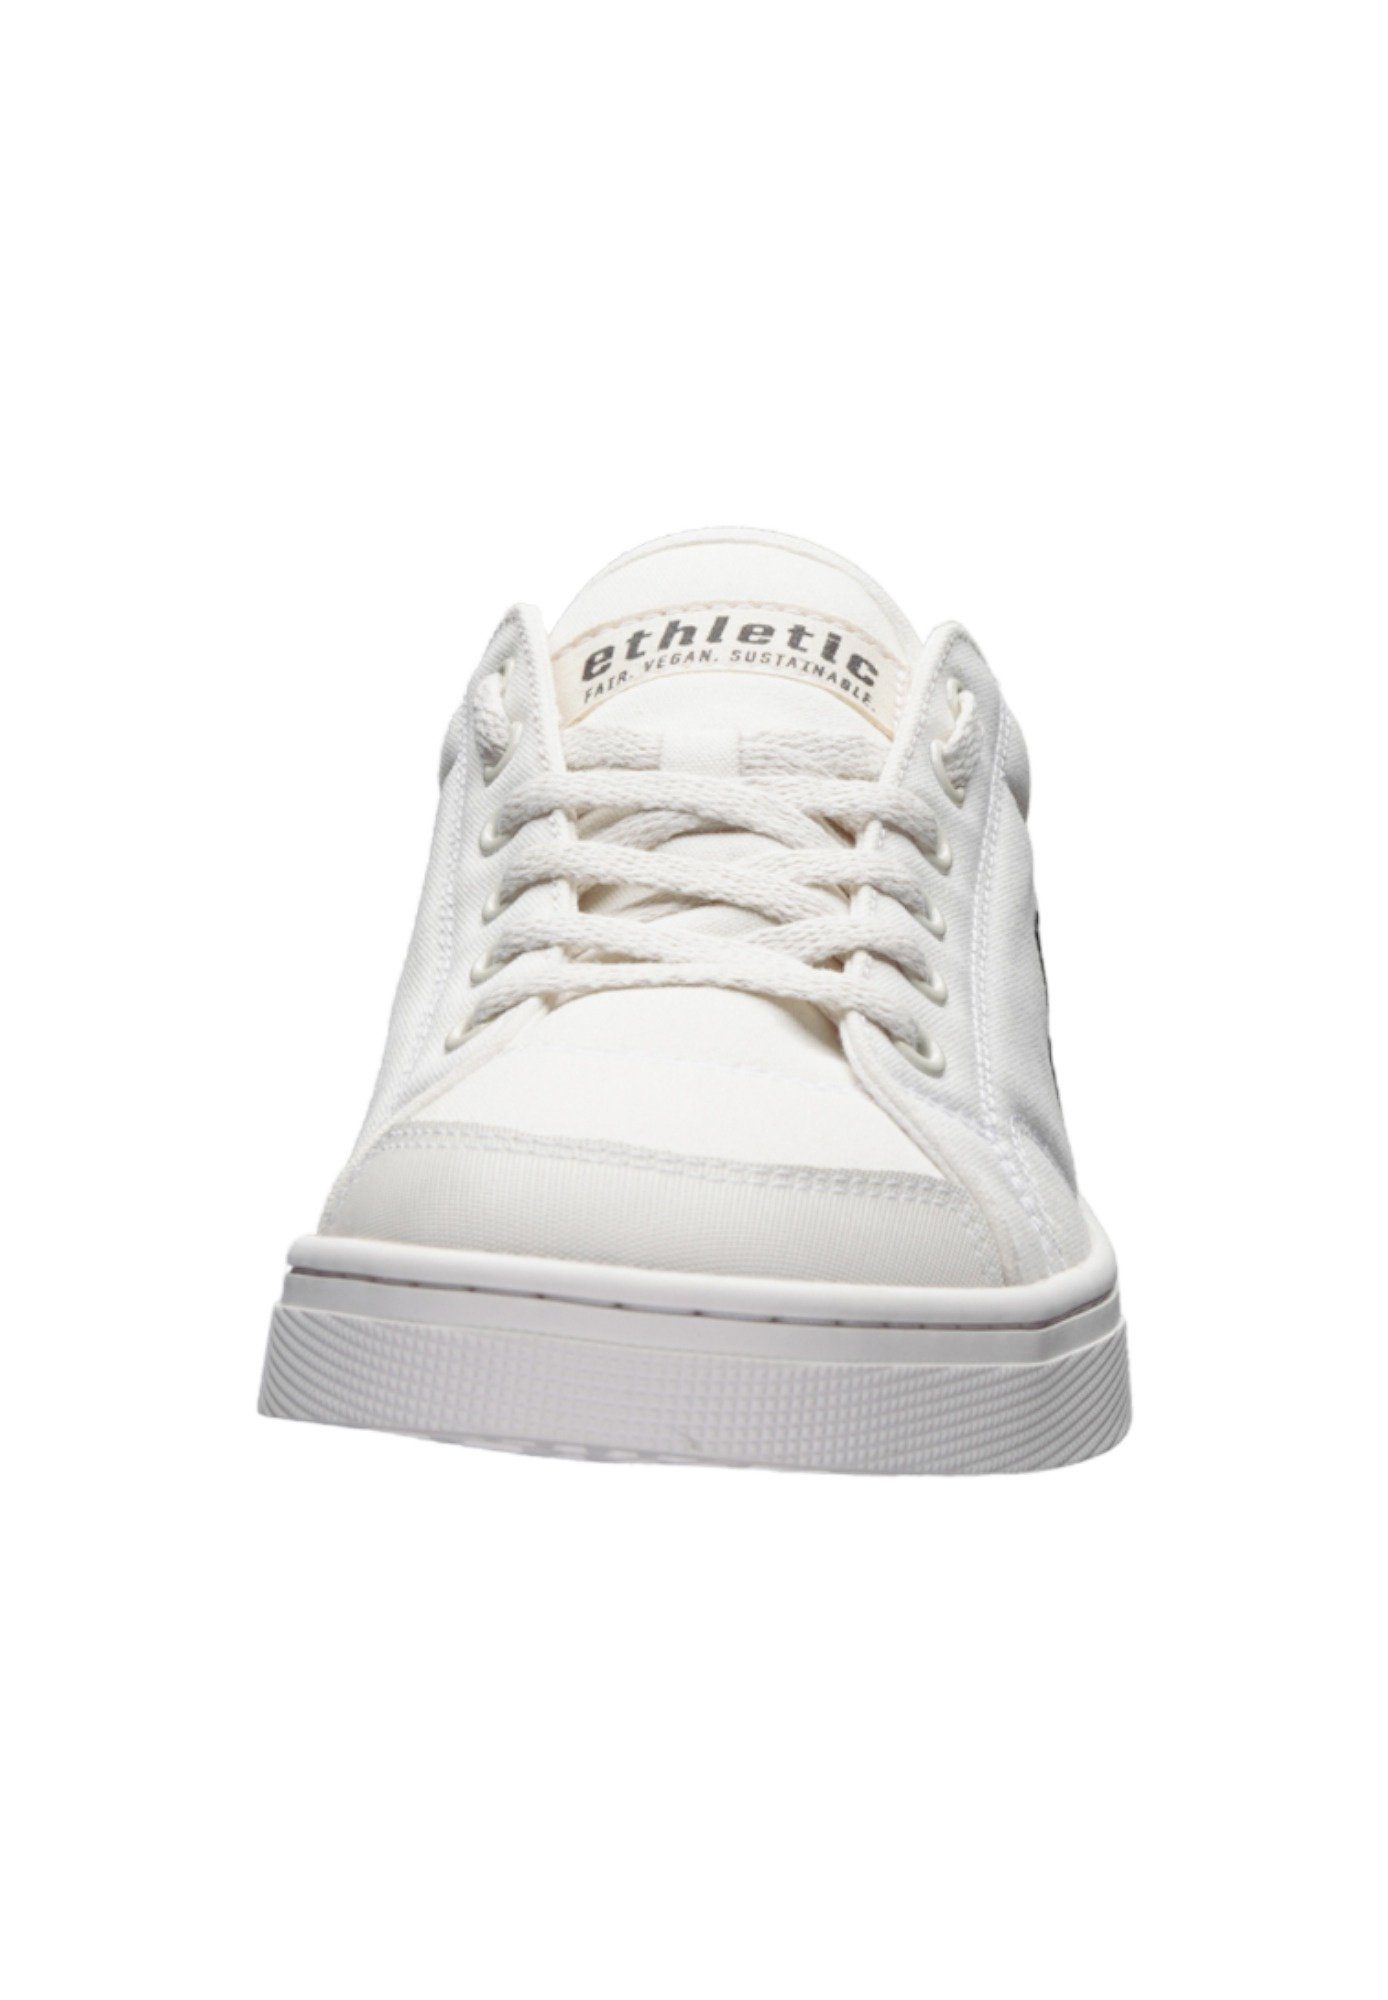 Lo Just White Cut Active Just Produkt ETHLETIC Sneaker Fairtrade - White